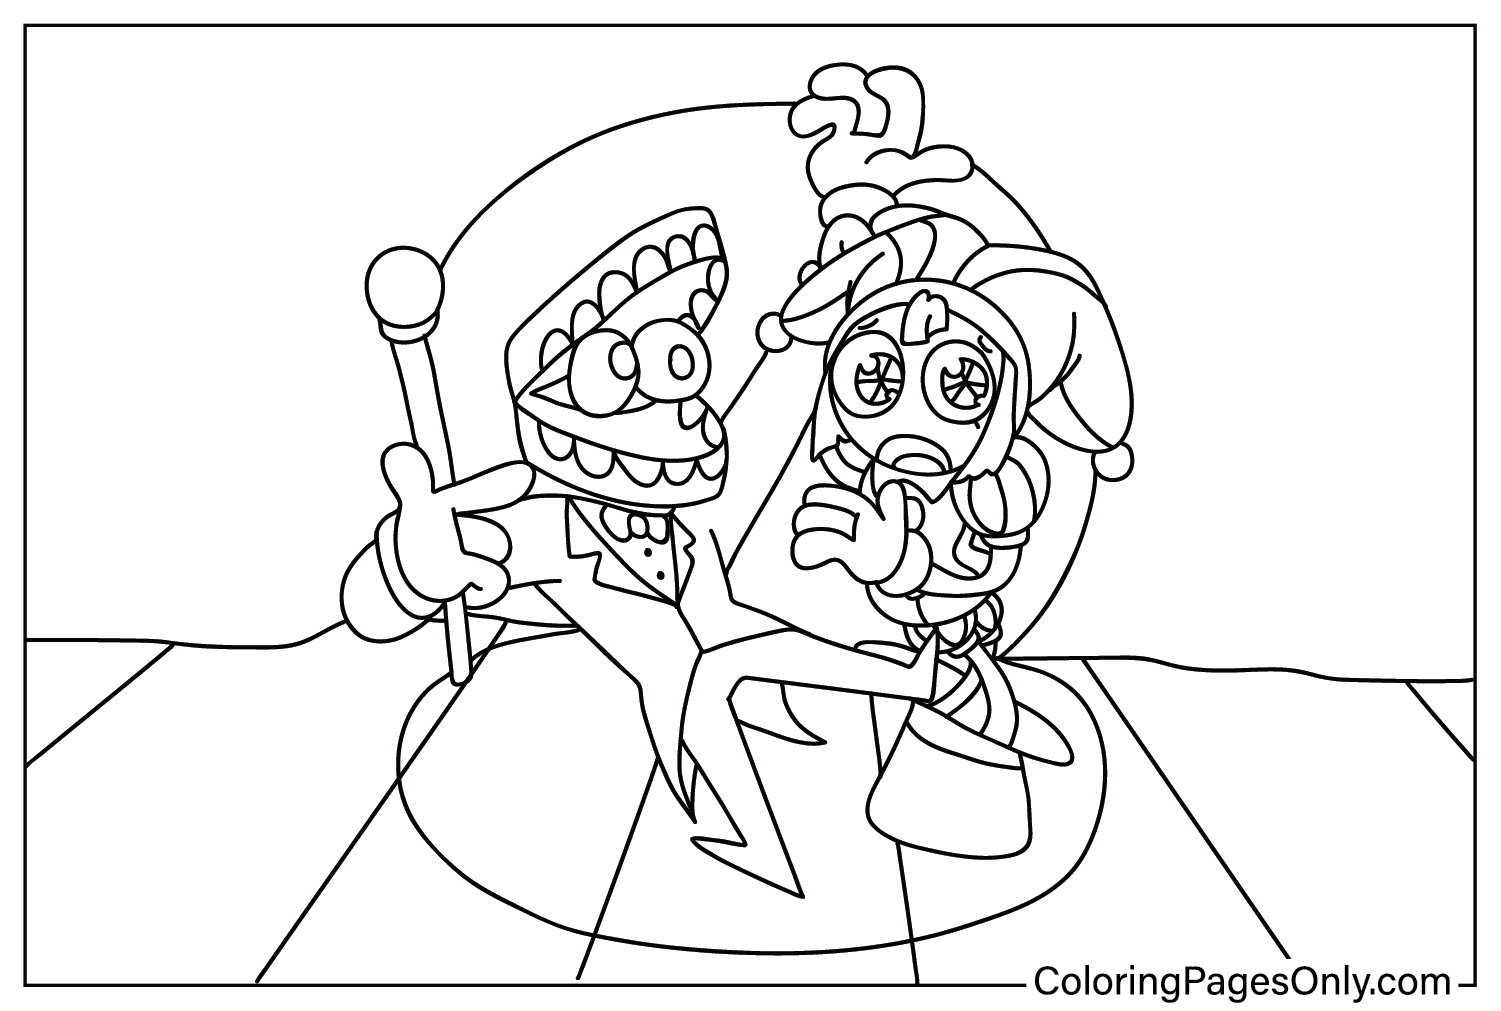 Caine, Pomni Coloring Page from Pomni